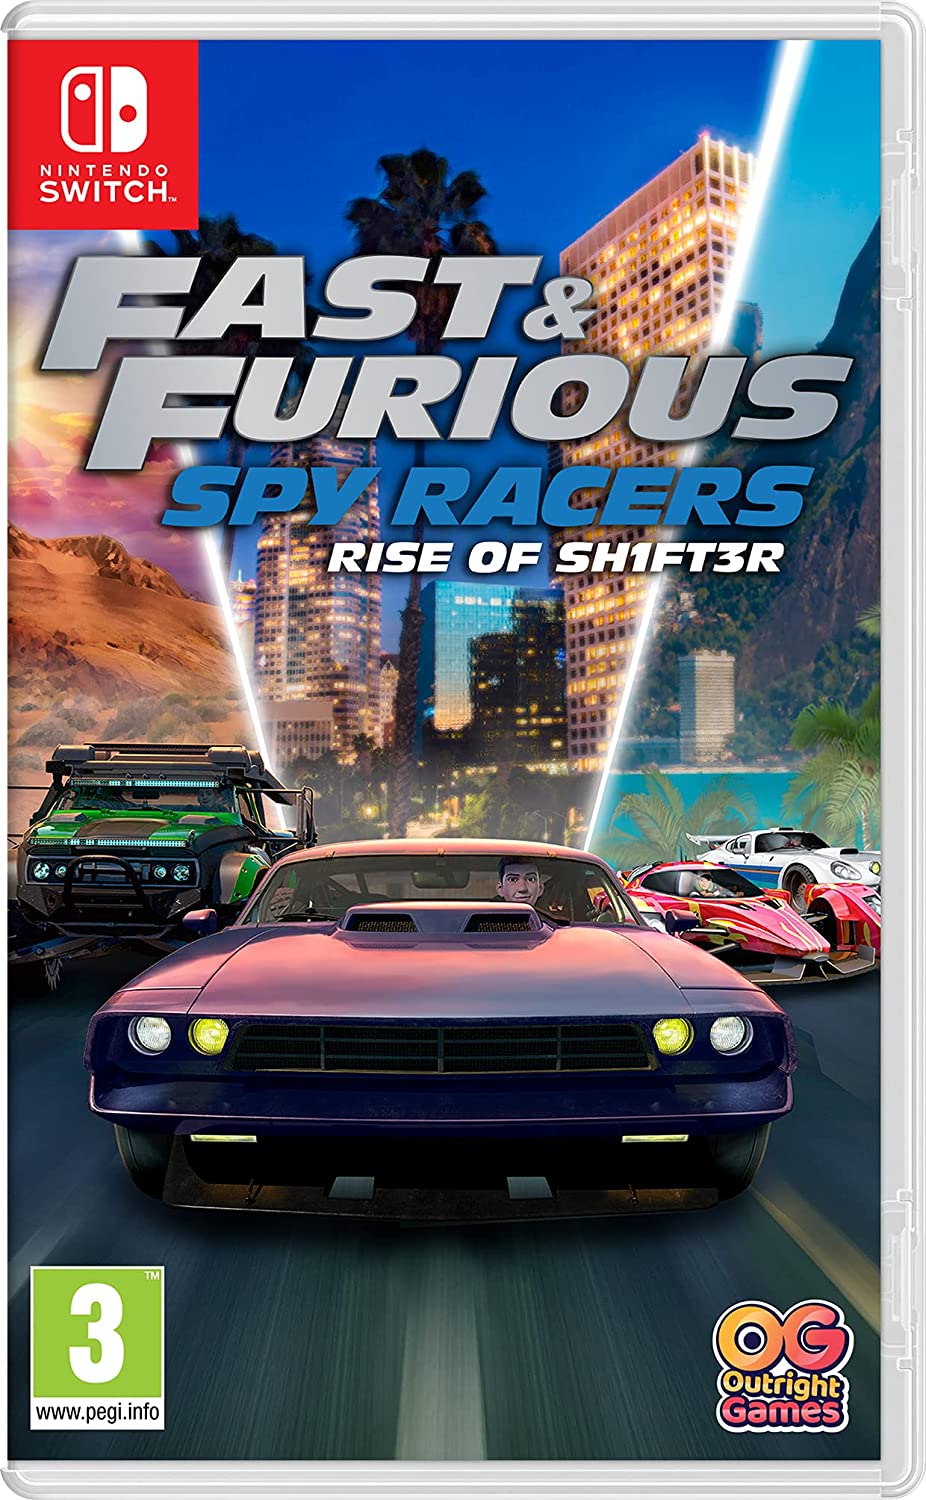 [Nintendo Switch] Fast & Furious: Spy Racers Rise of SH1FT3R